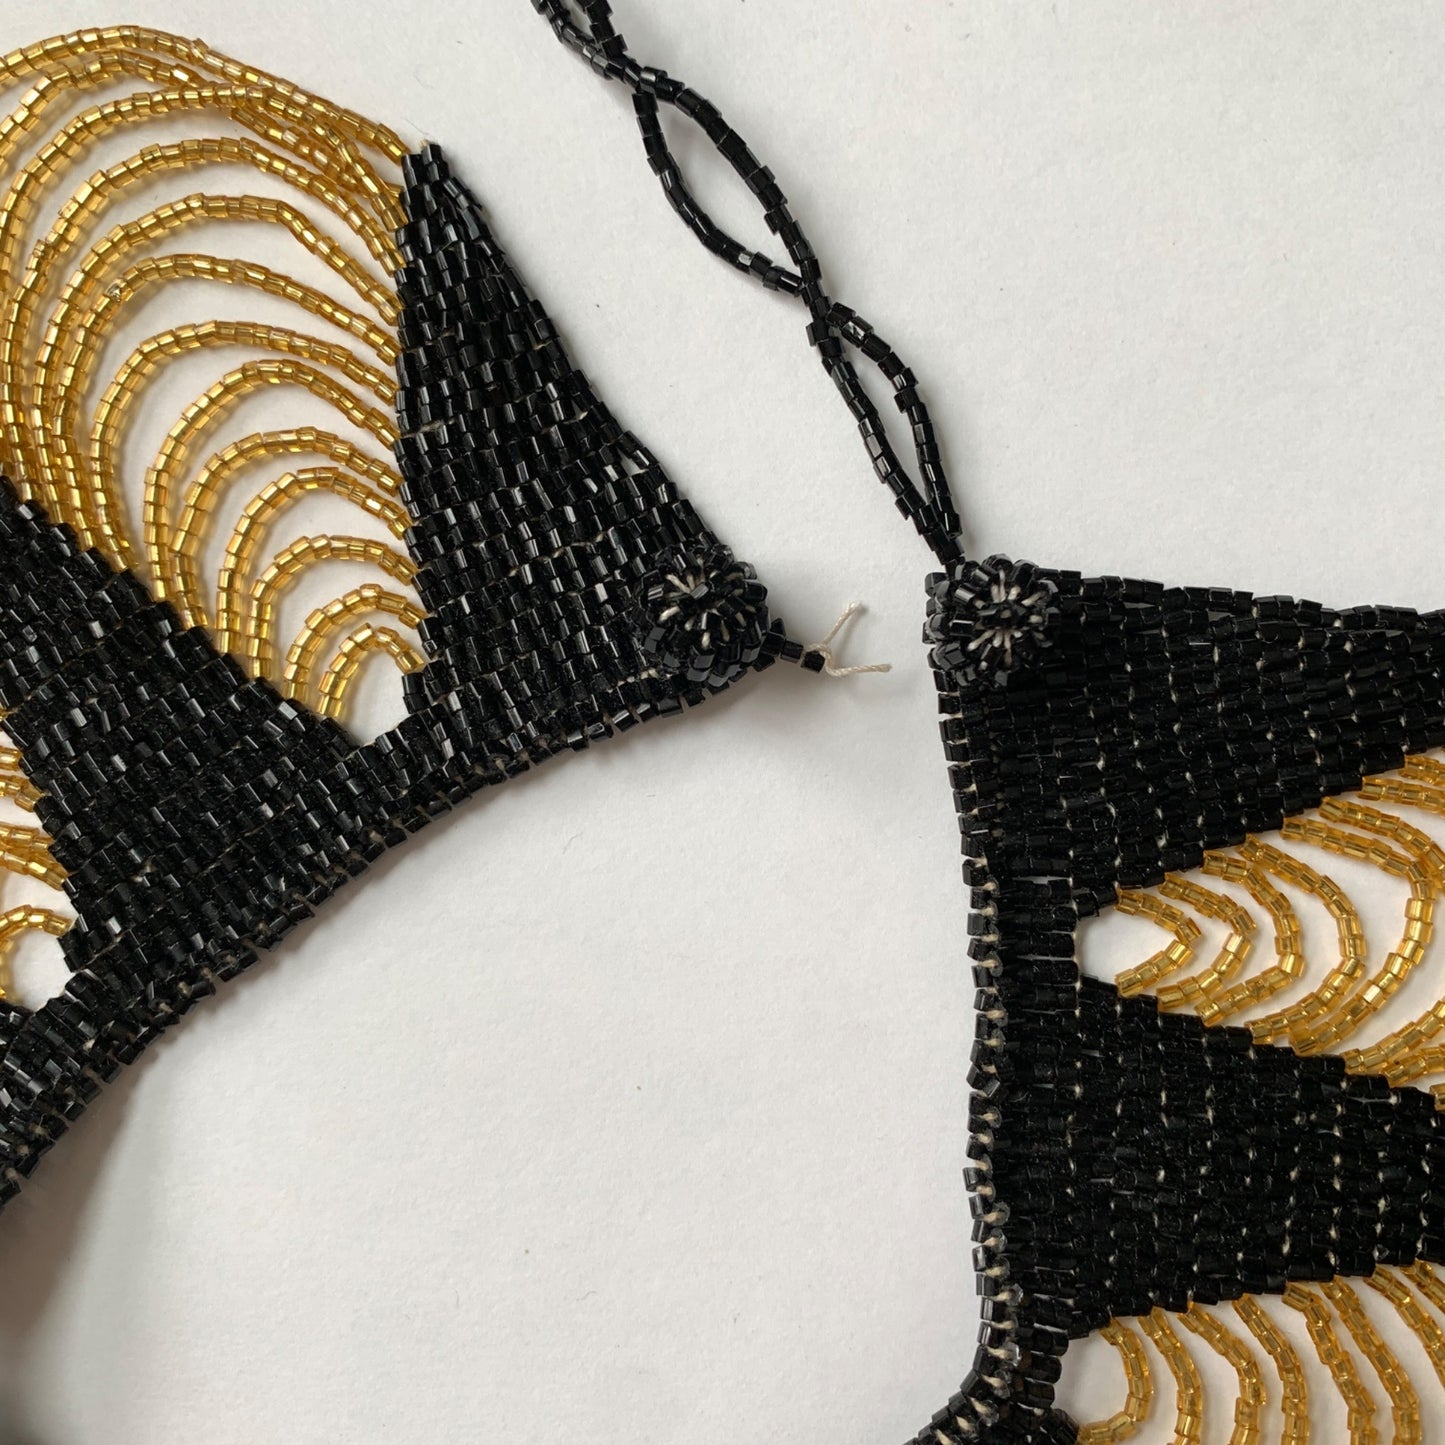 Vintage 1960s ? Black & Gold Beaded Collar Necklace